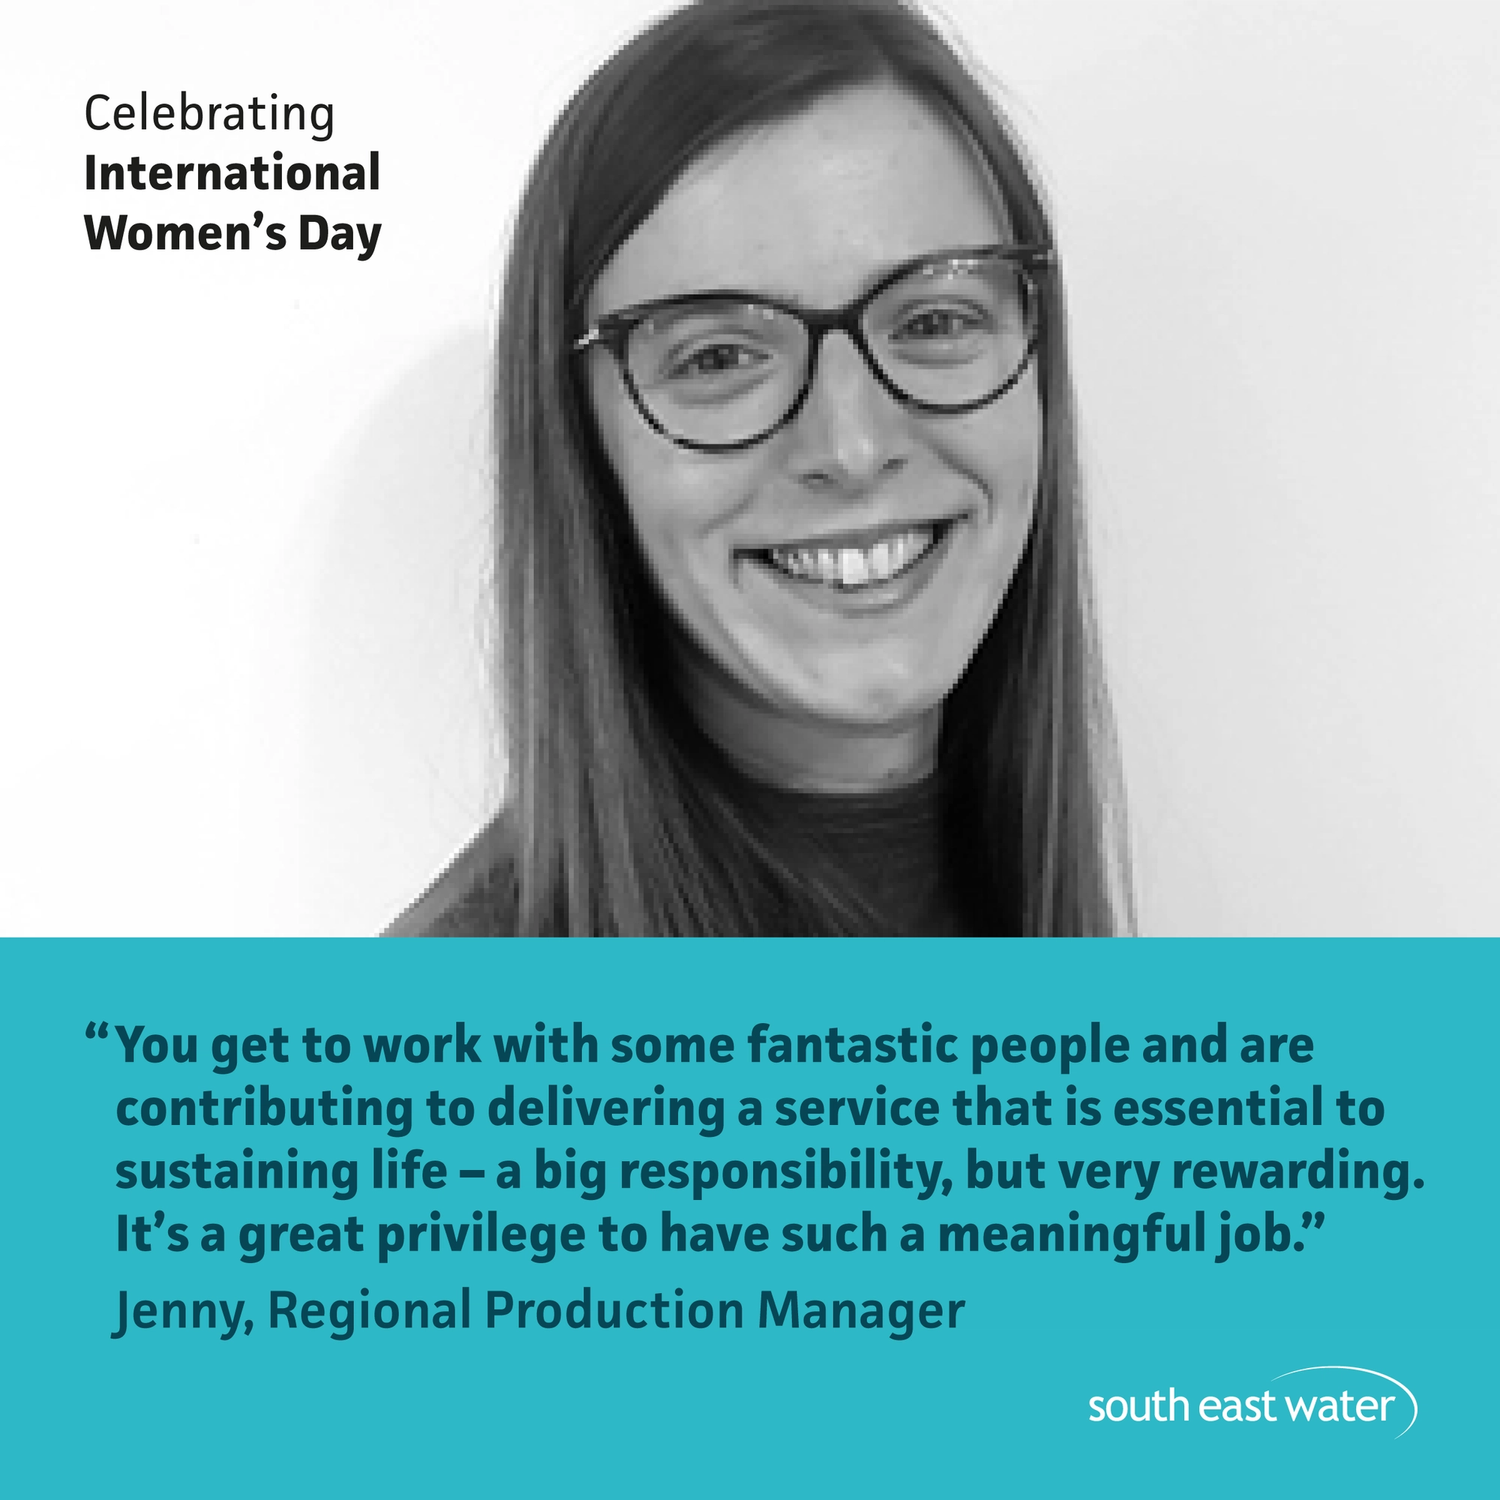 Jenny Rhodes, Regional Production Manager